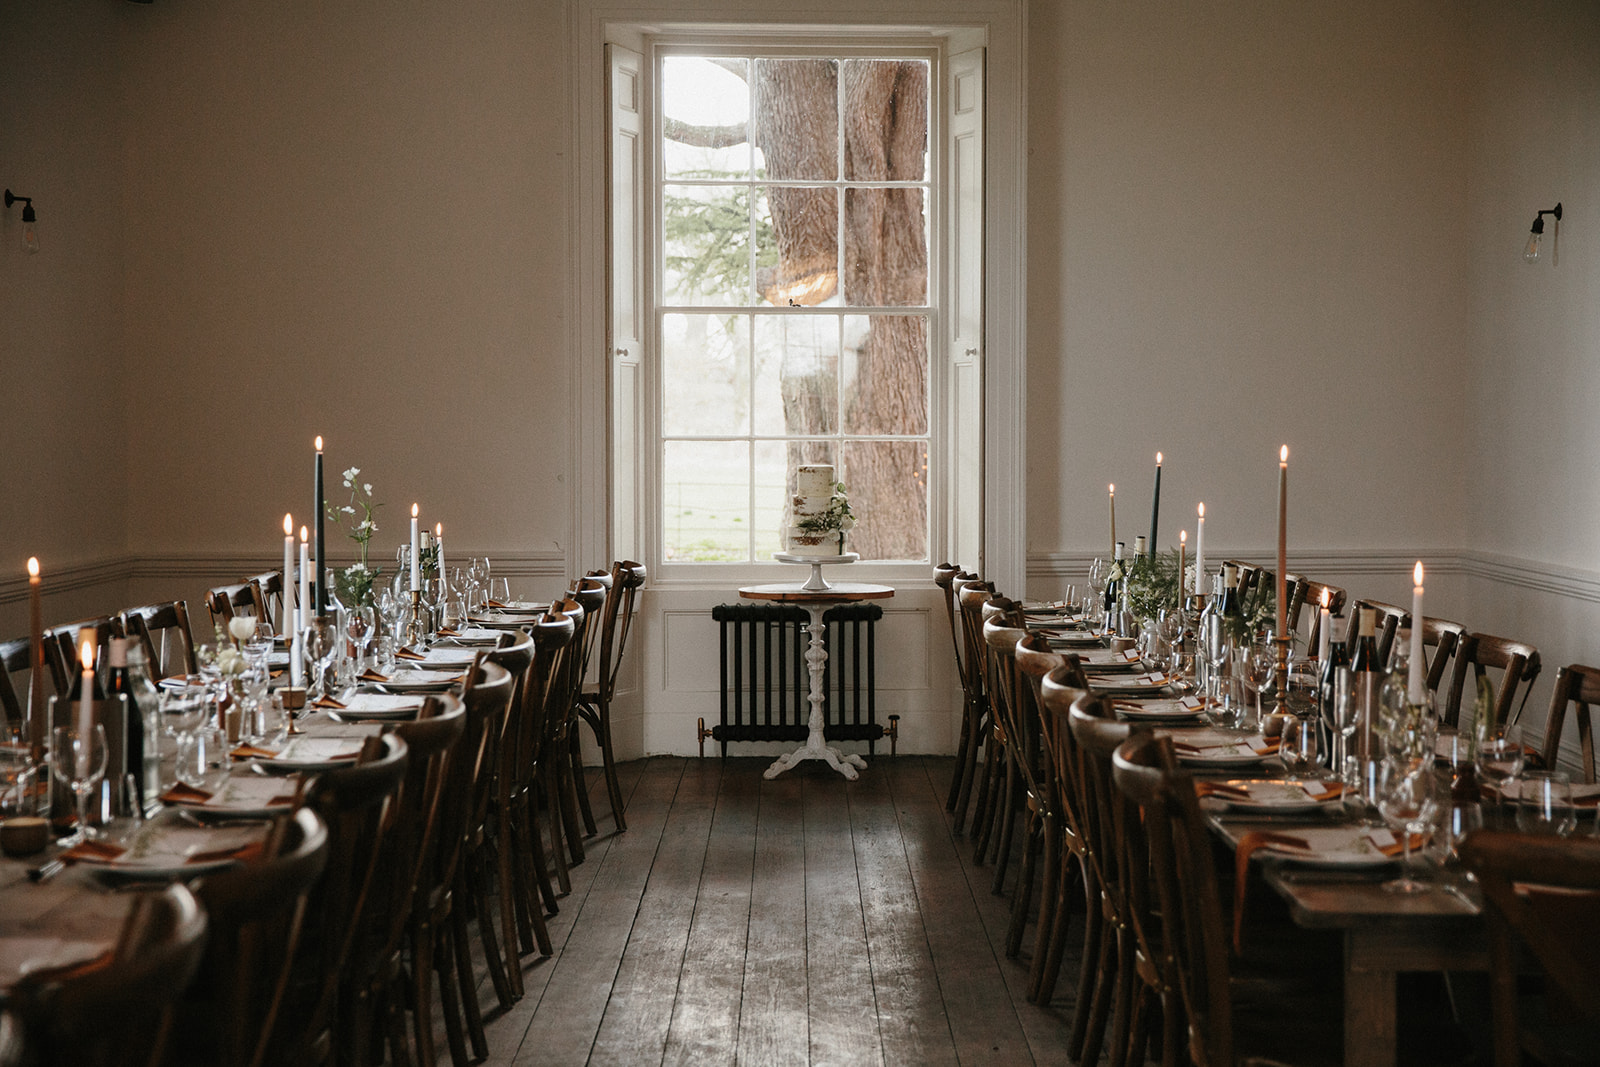 Crossback chairs + long wooden tables at Aswarby Rectory wedding venue